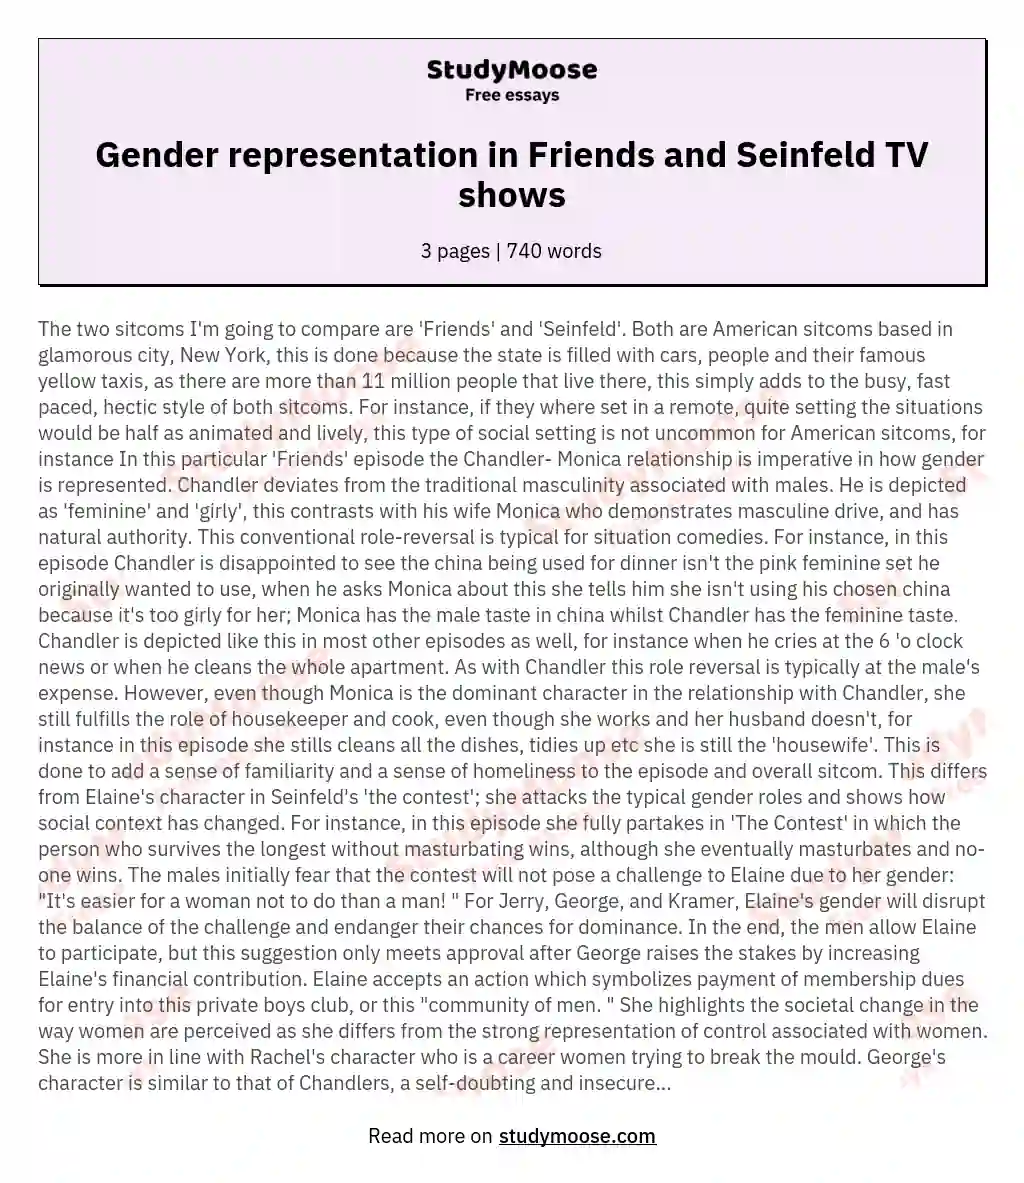 Gender representation in Friends and Seinfeld TV shows essay